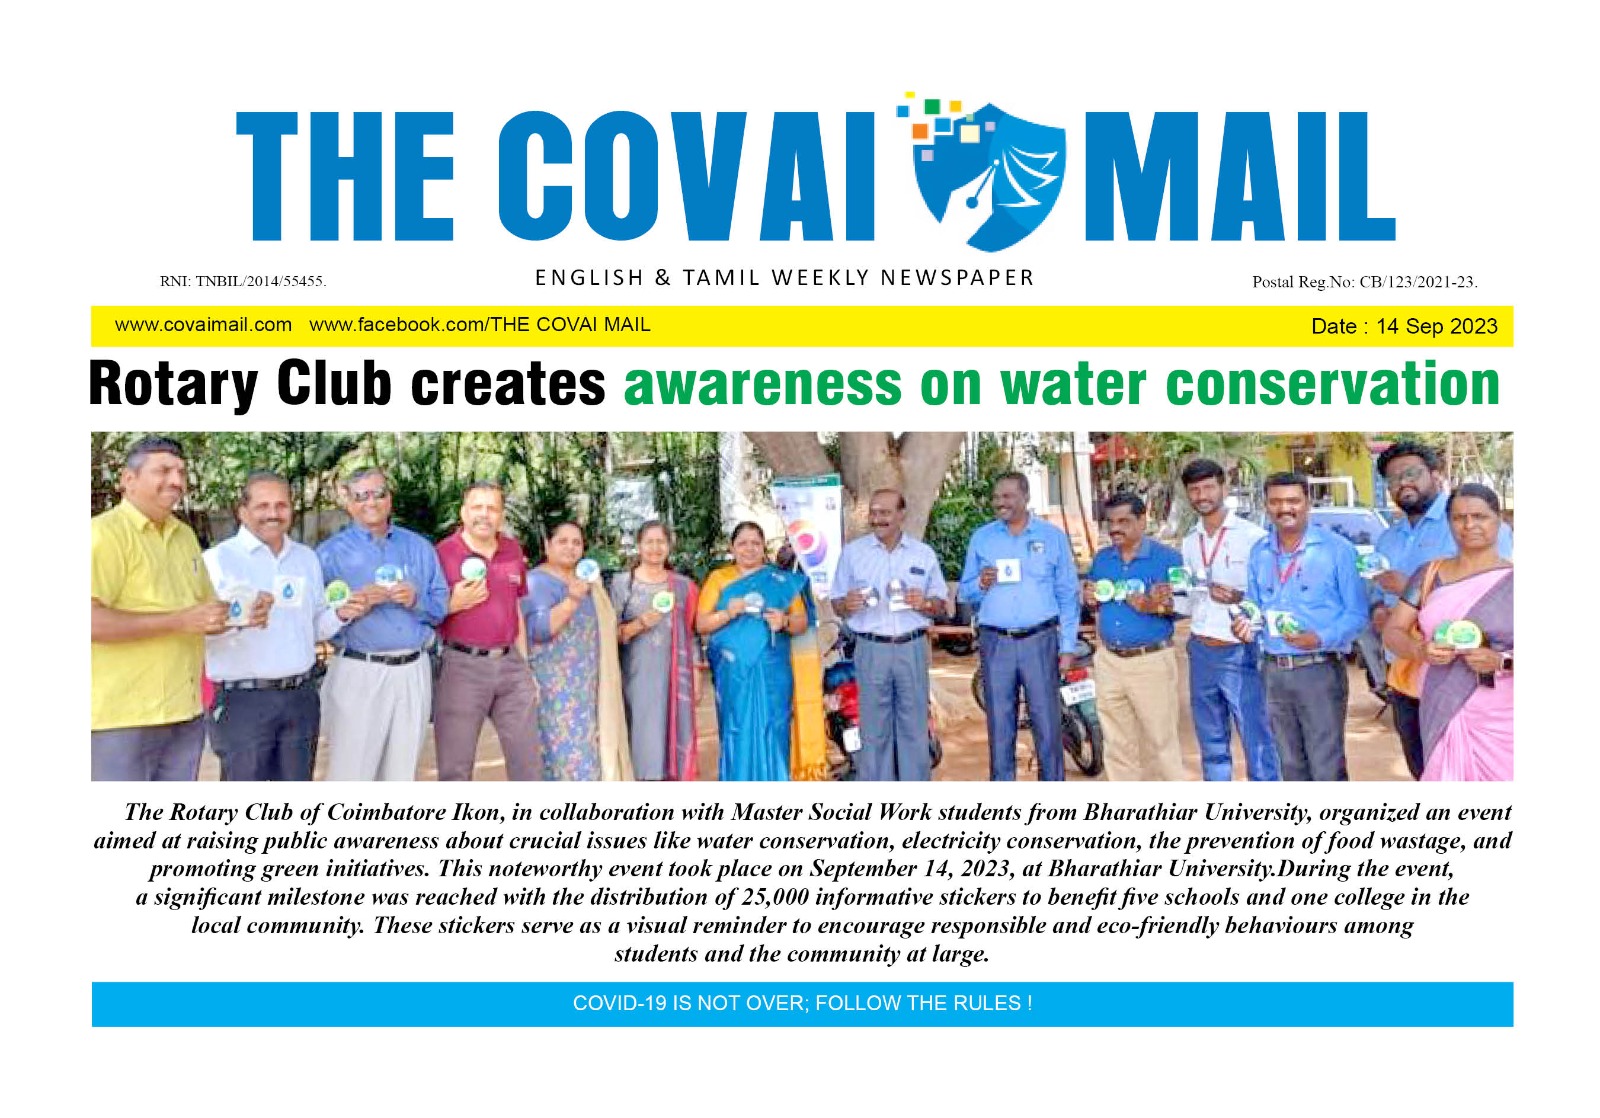 Awareness on Water Conservation